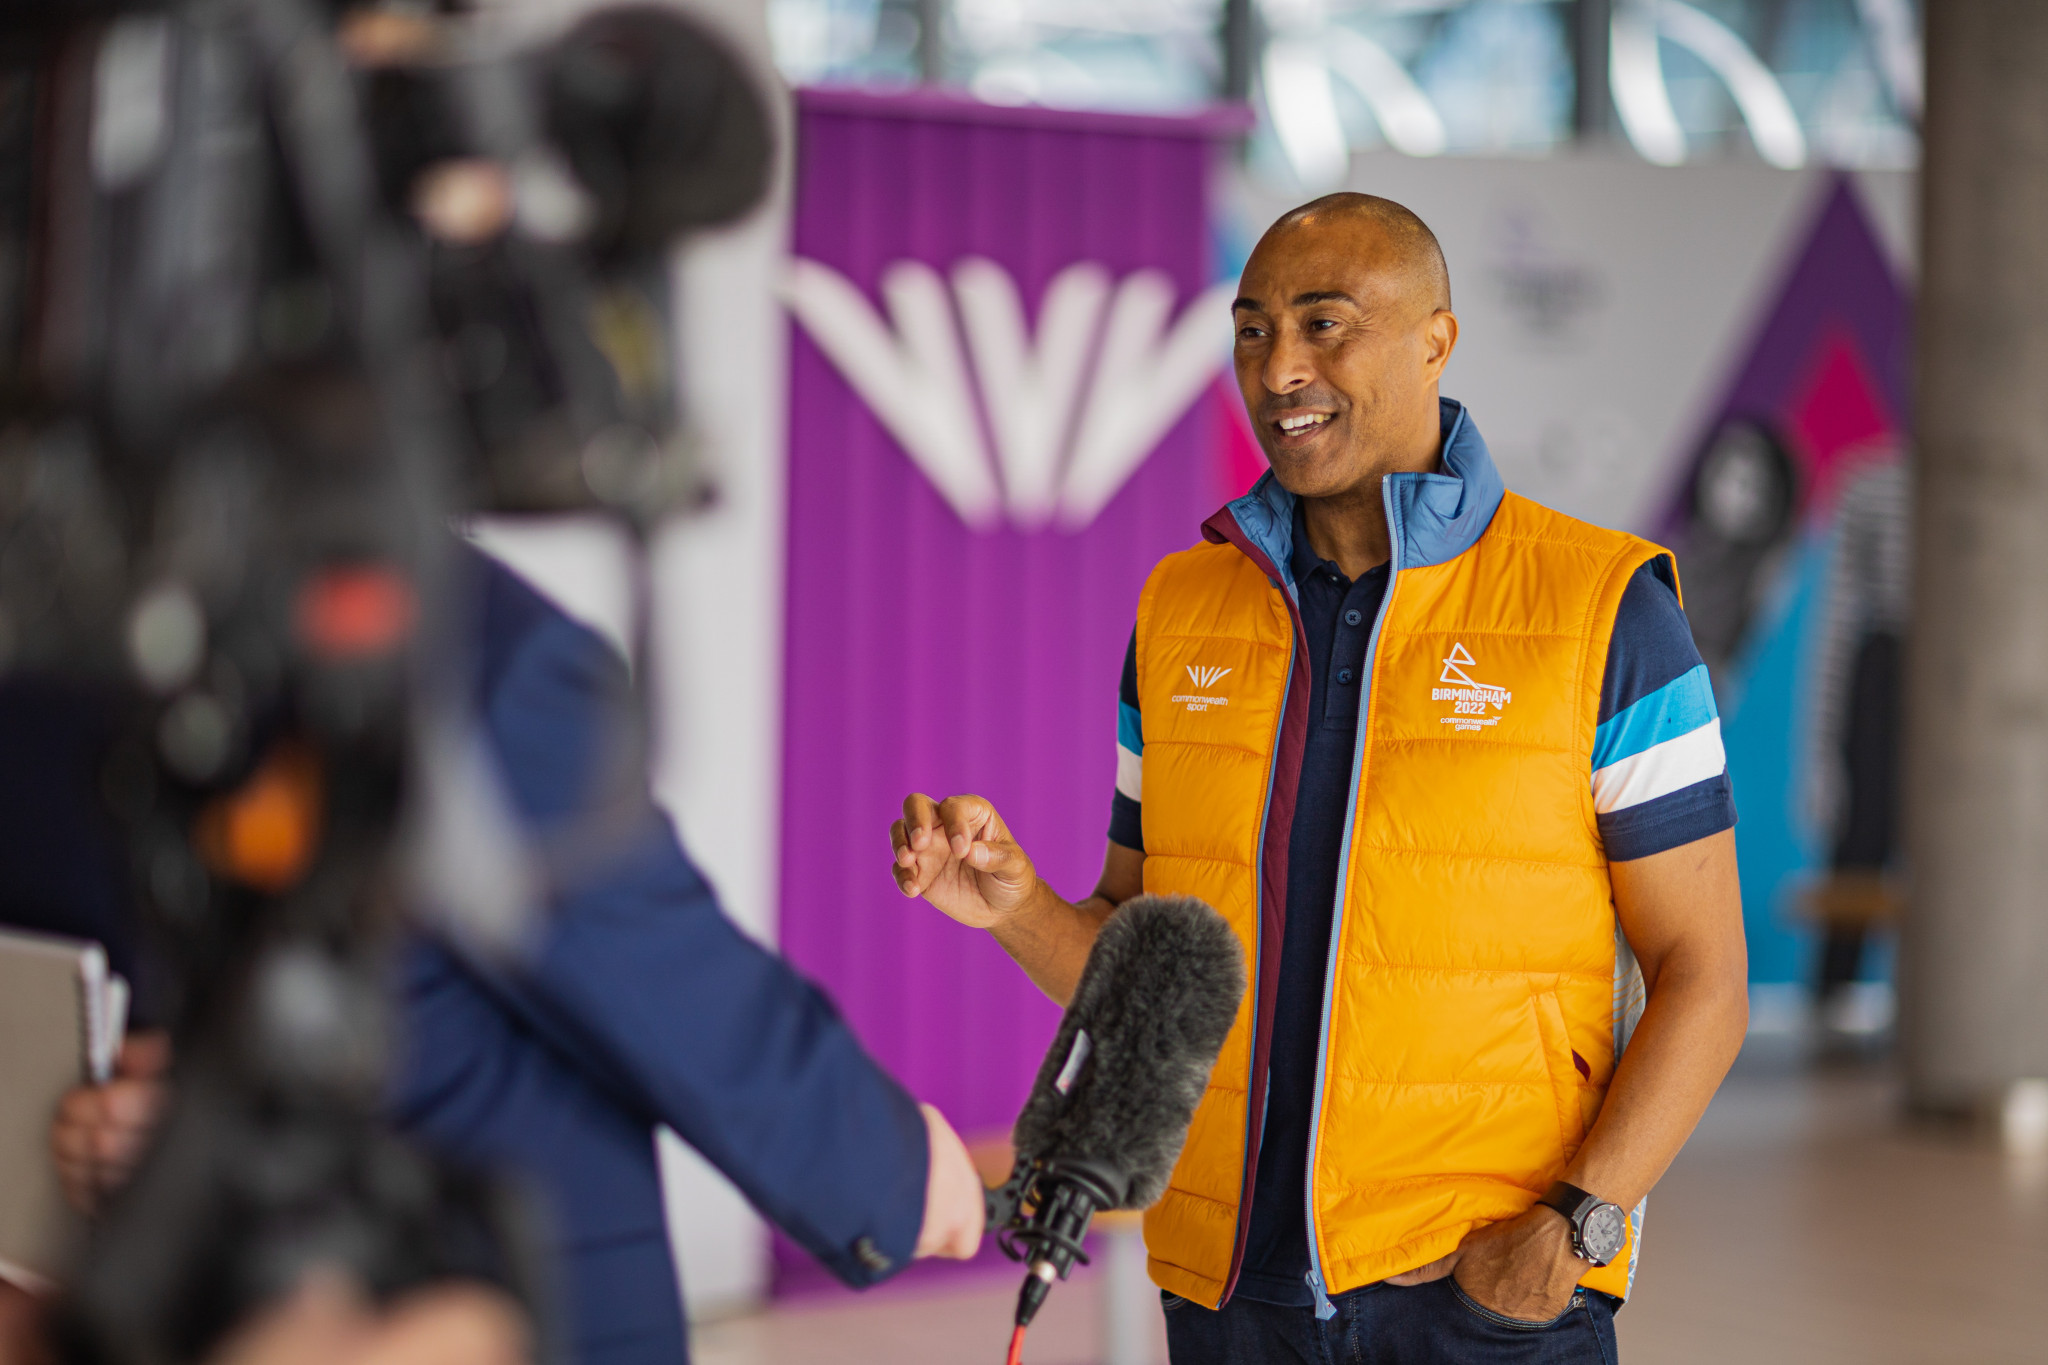 Double Commonwealth Games gold medallist Colin Jackson was present at the launch as he has been supporting the volunteering campaign since June 2021 ©Birmingham 2022